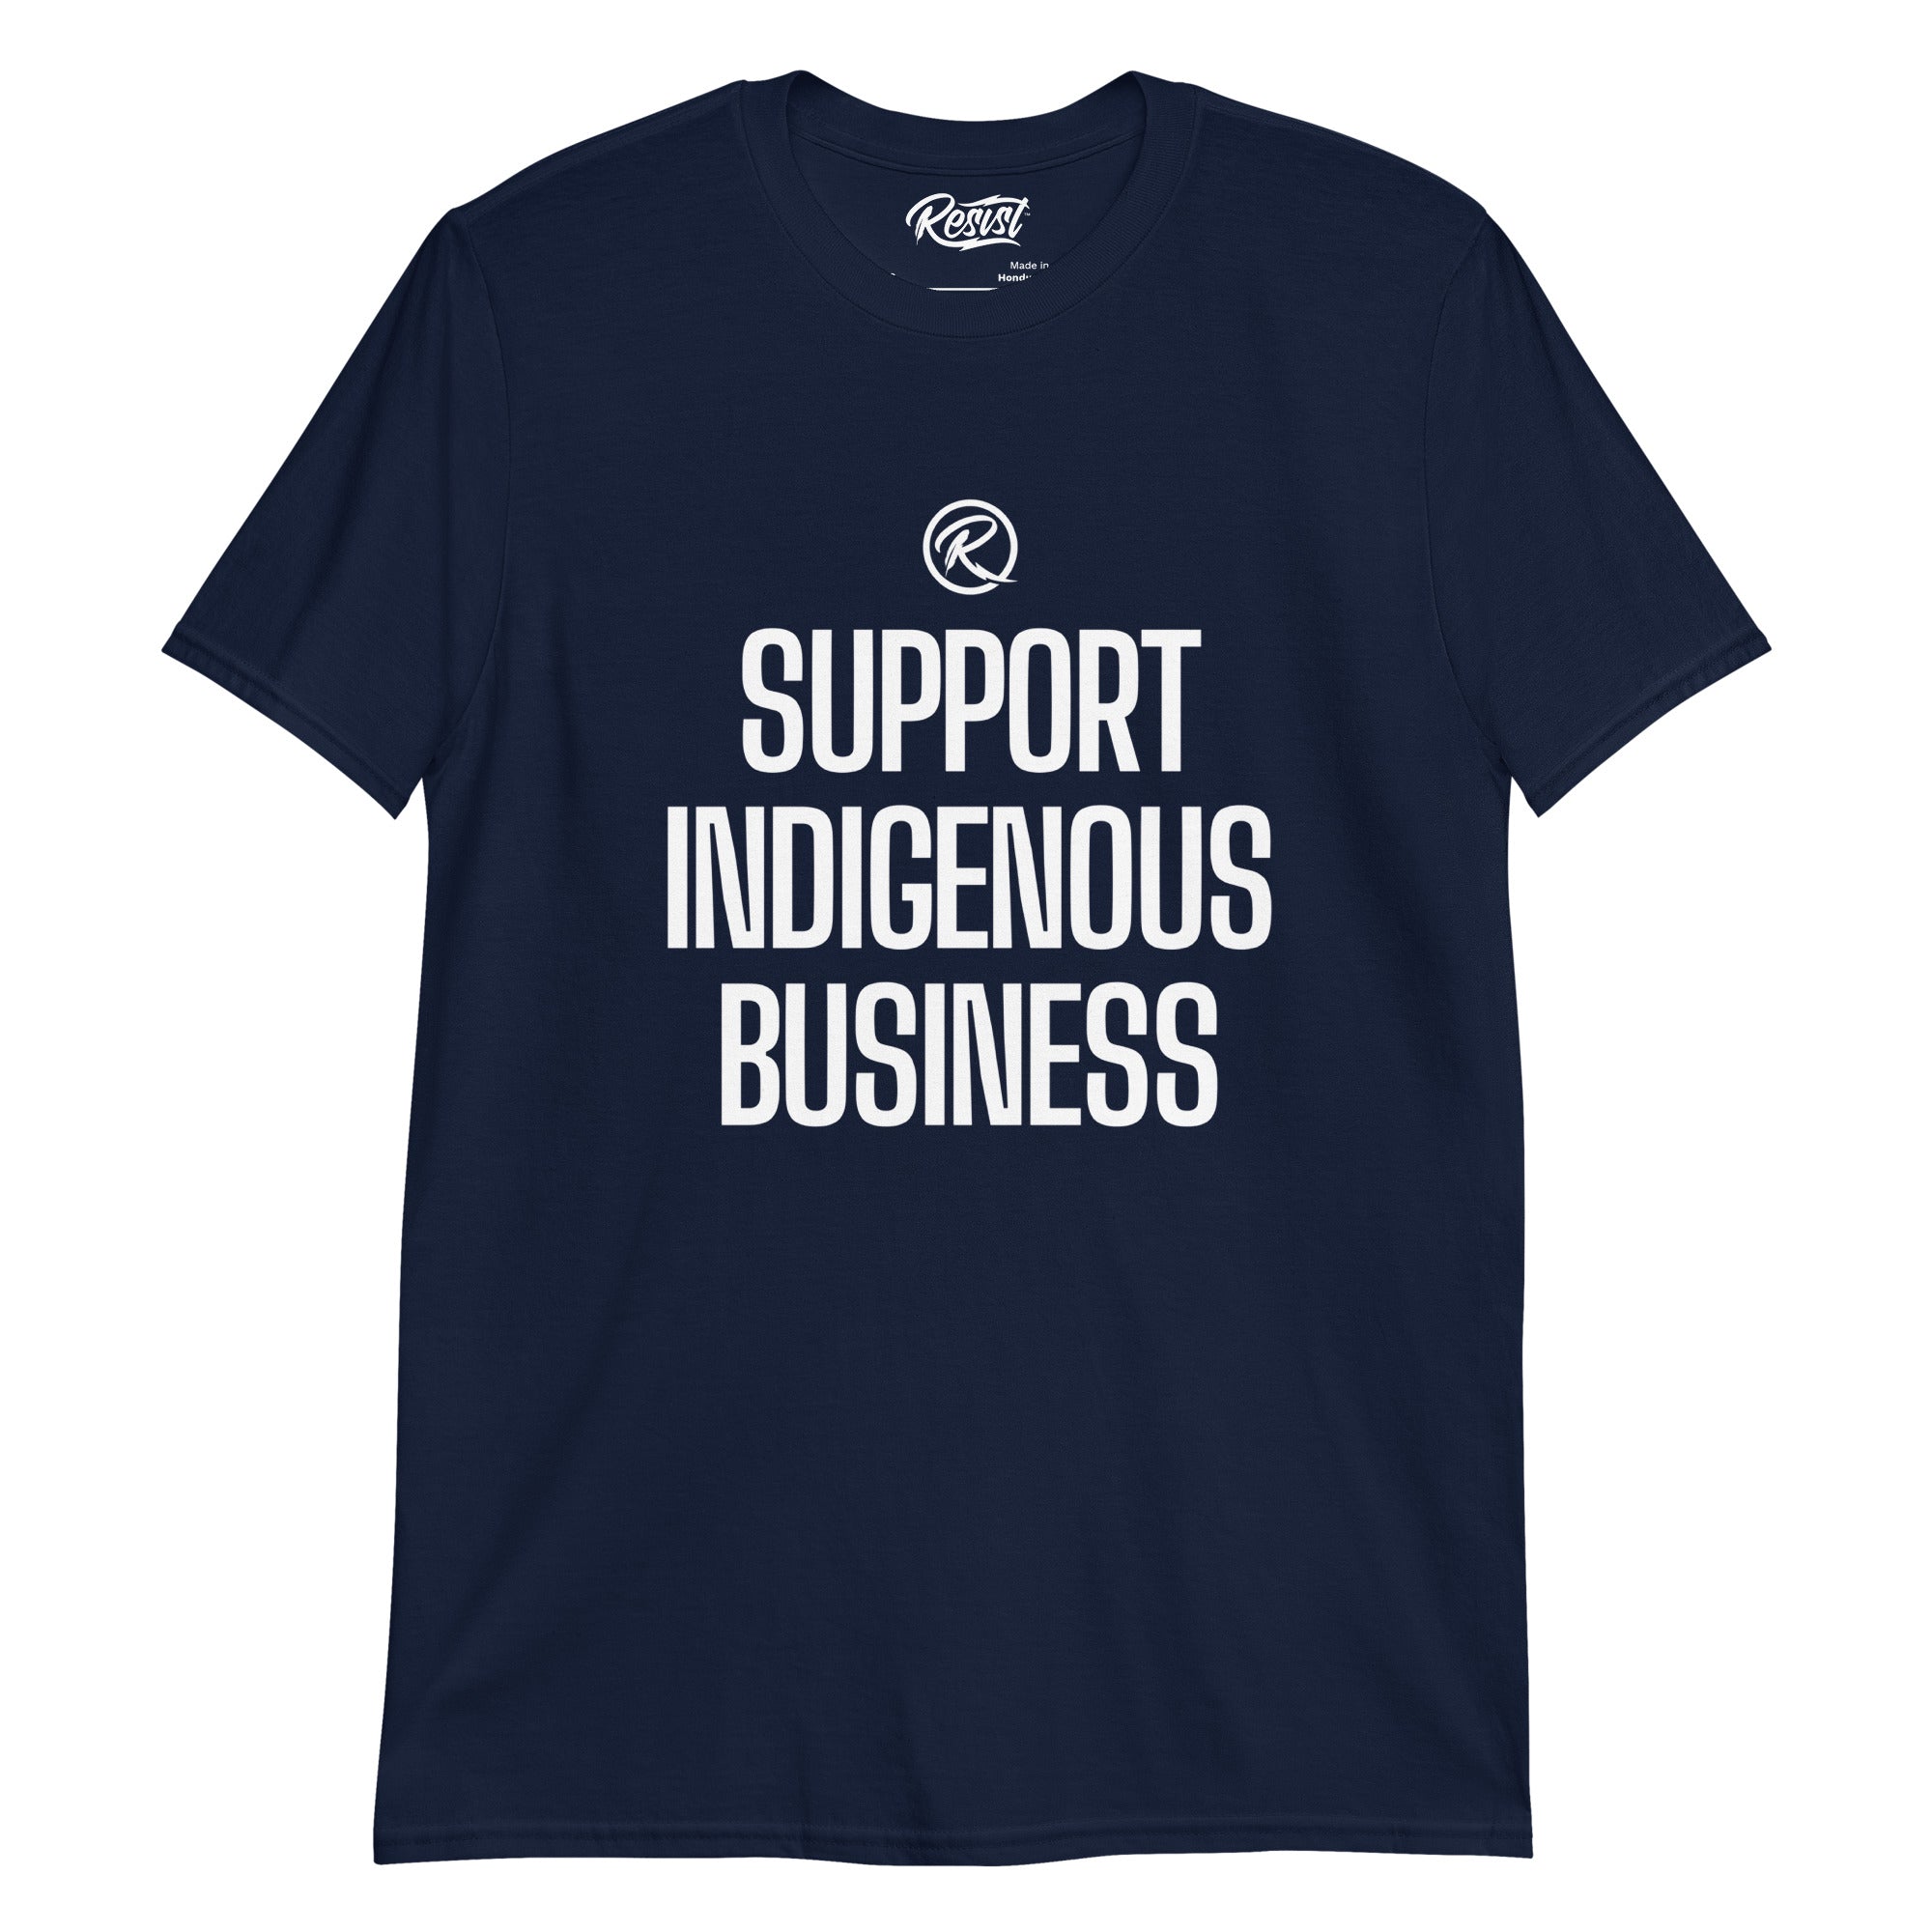 Support Indigenous Business T-shirt